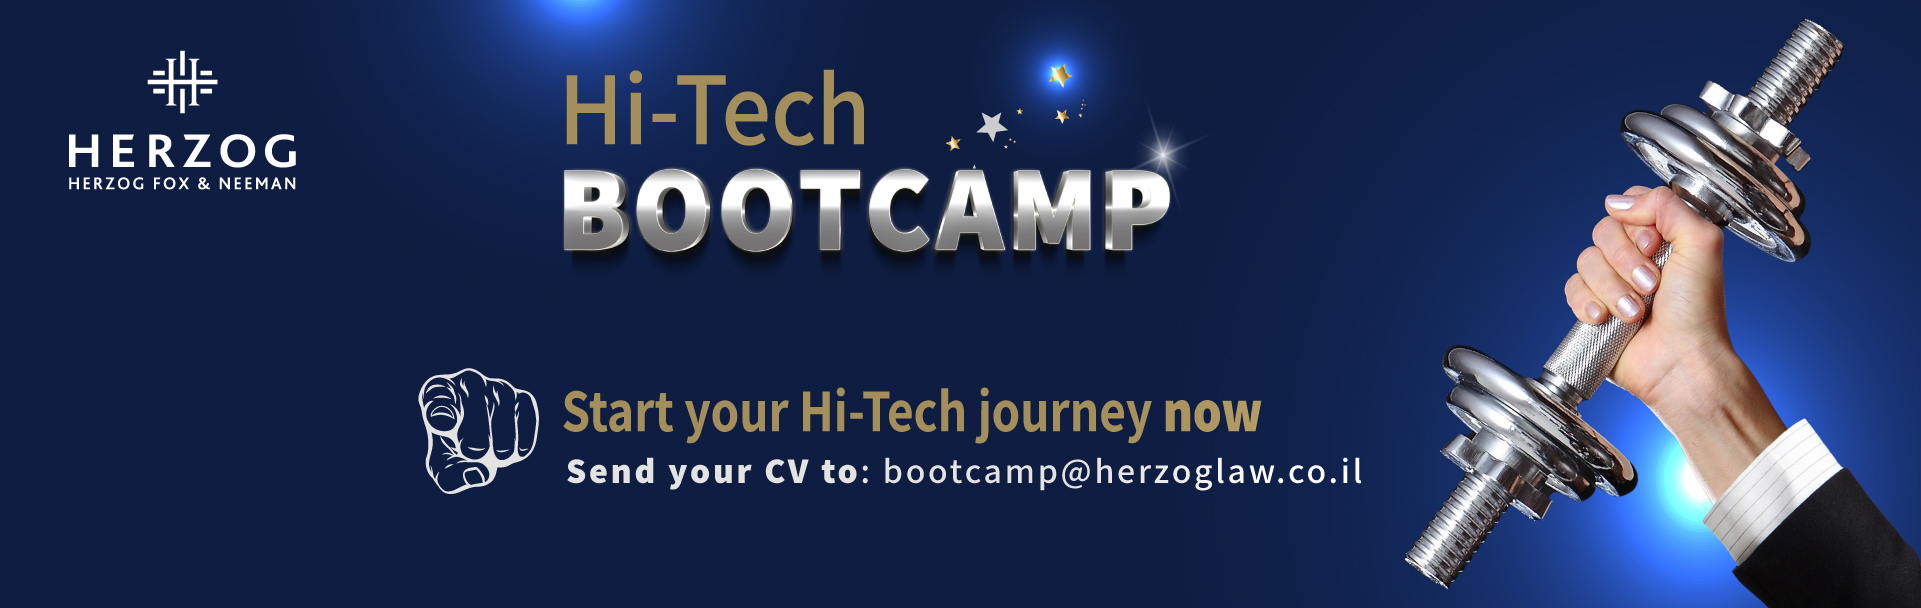 Hi-Tech Bootcamp. Start your Hi-tech Journey now!.Send your CV to bootcamp@herzoglaw.co.il